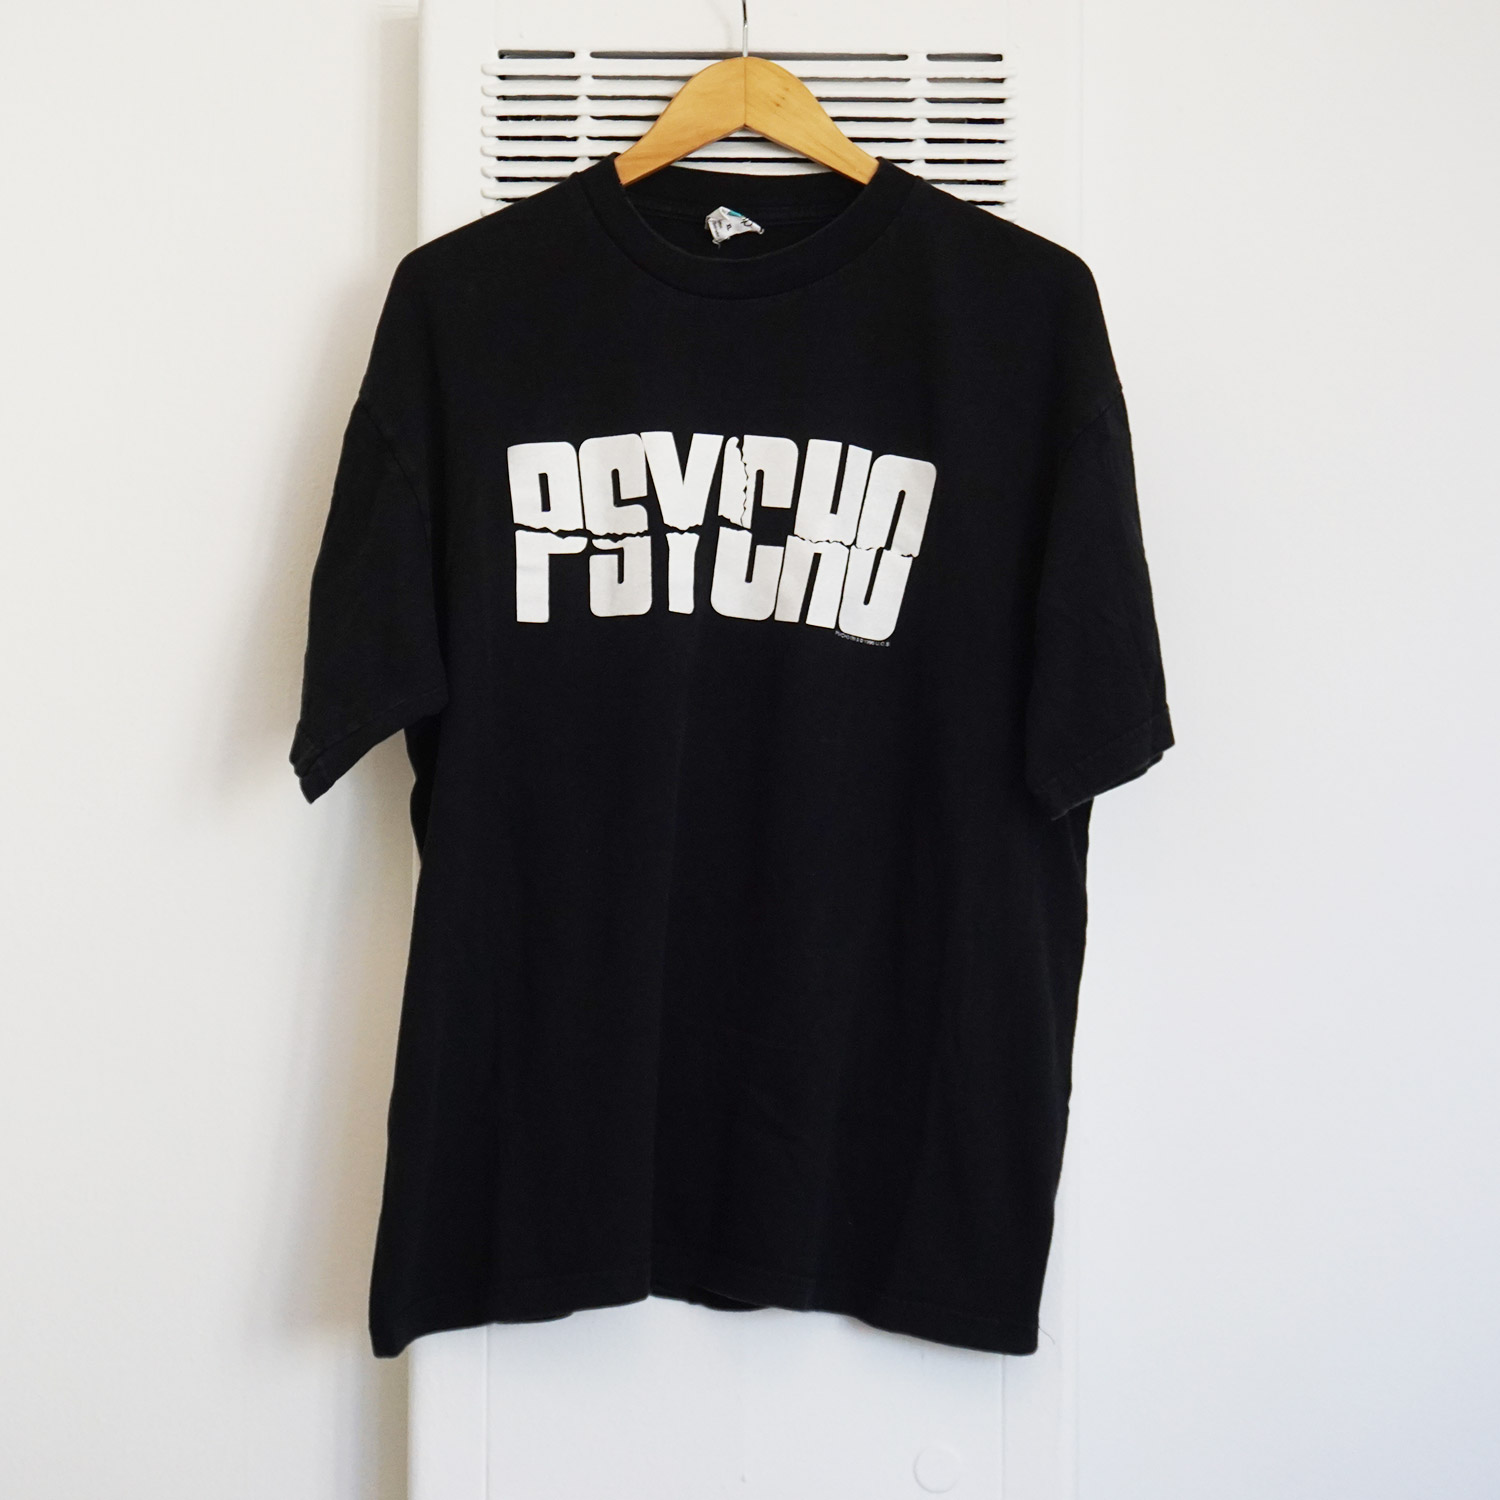 Vintage Psycho Movie T-shirt, Front